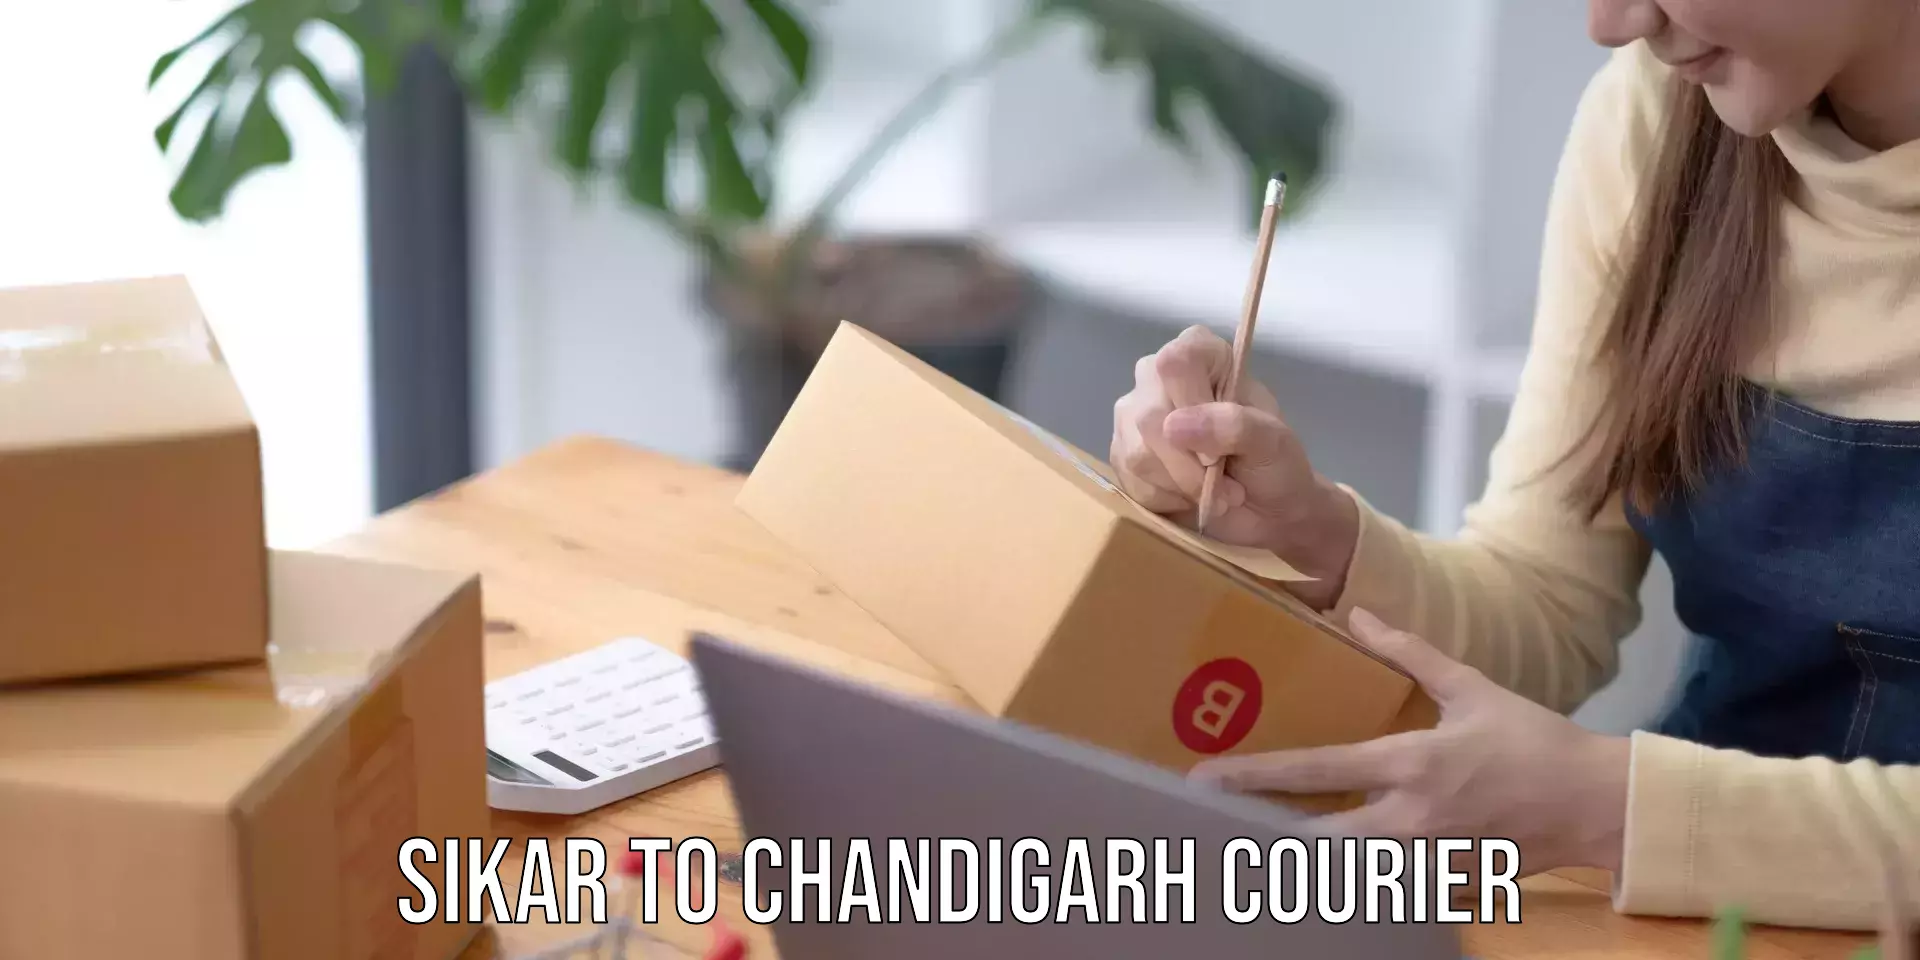 Courier service innovation Sikar to Chandigarh